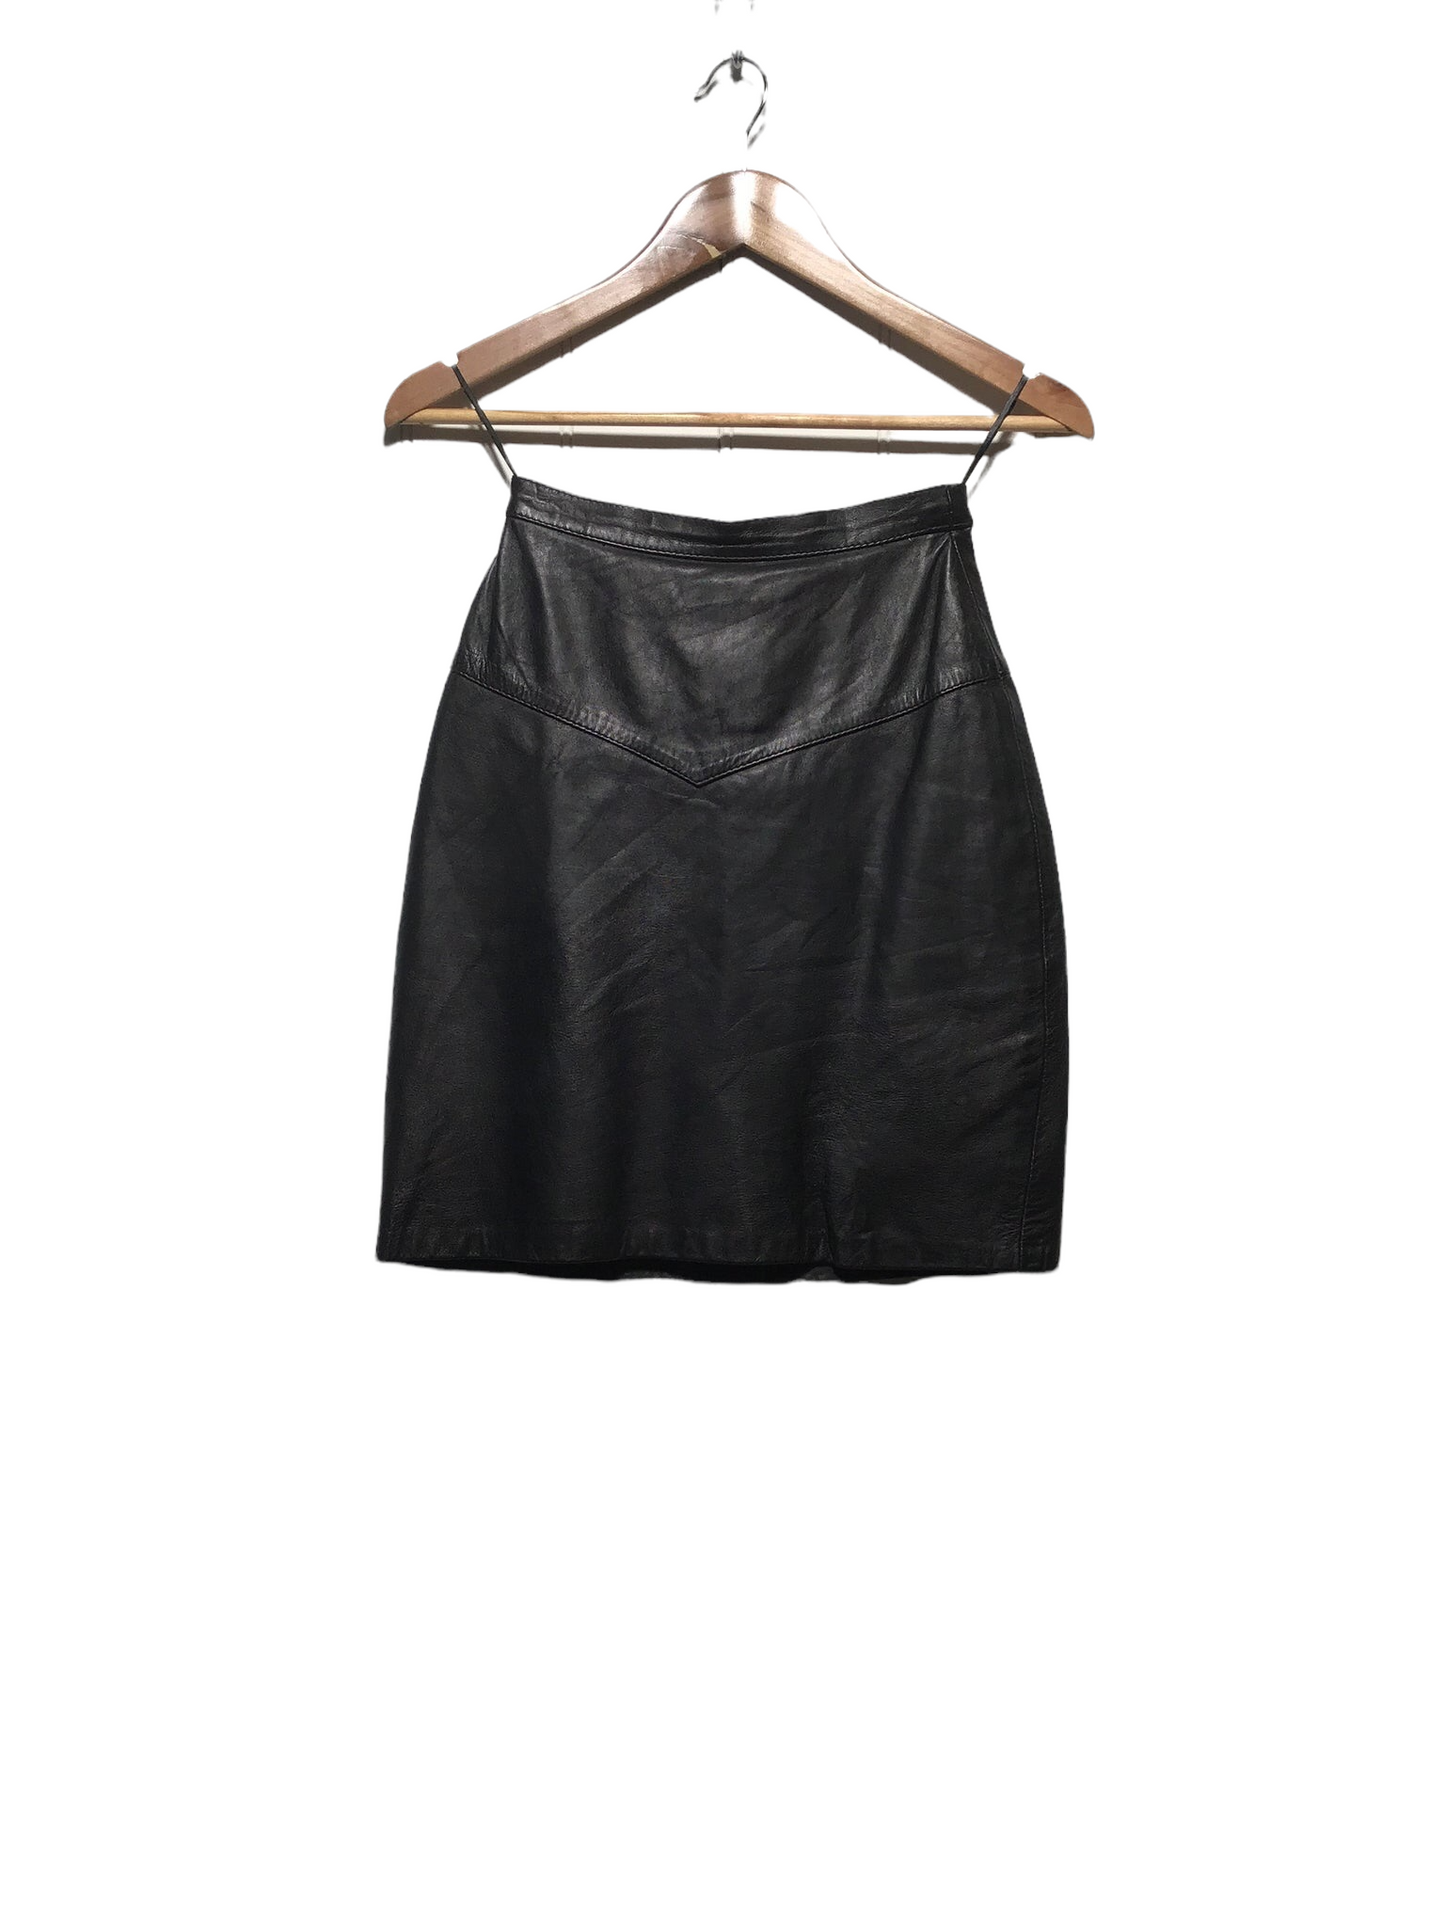 Short Leather Skirt (Size XS)